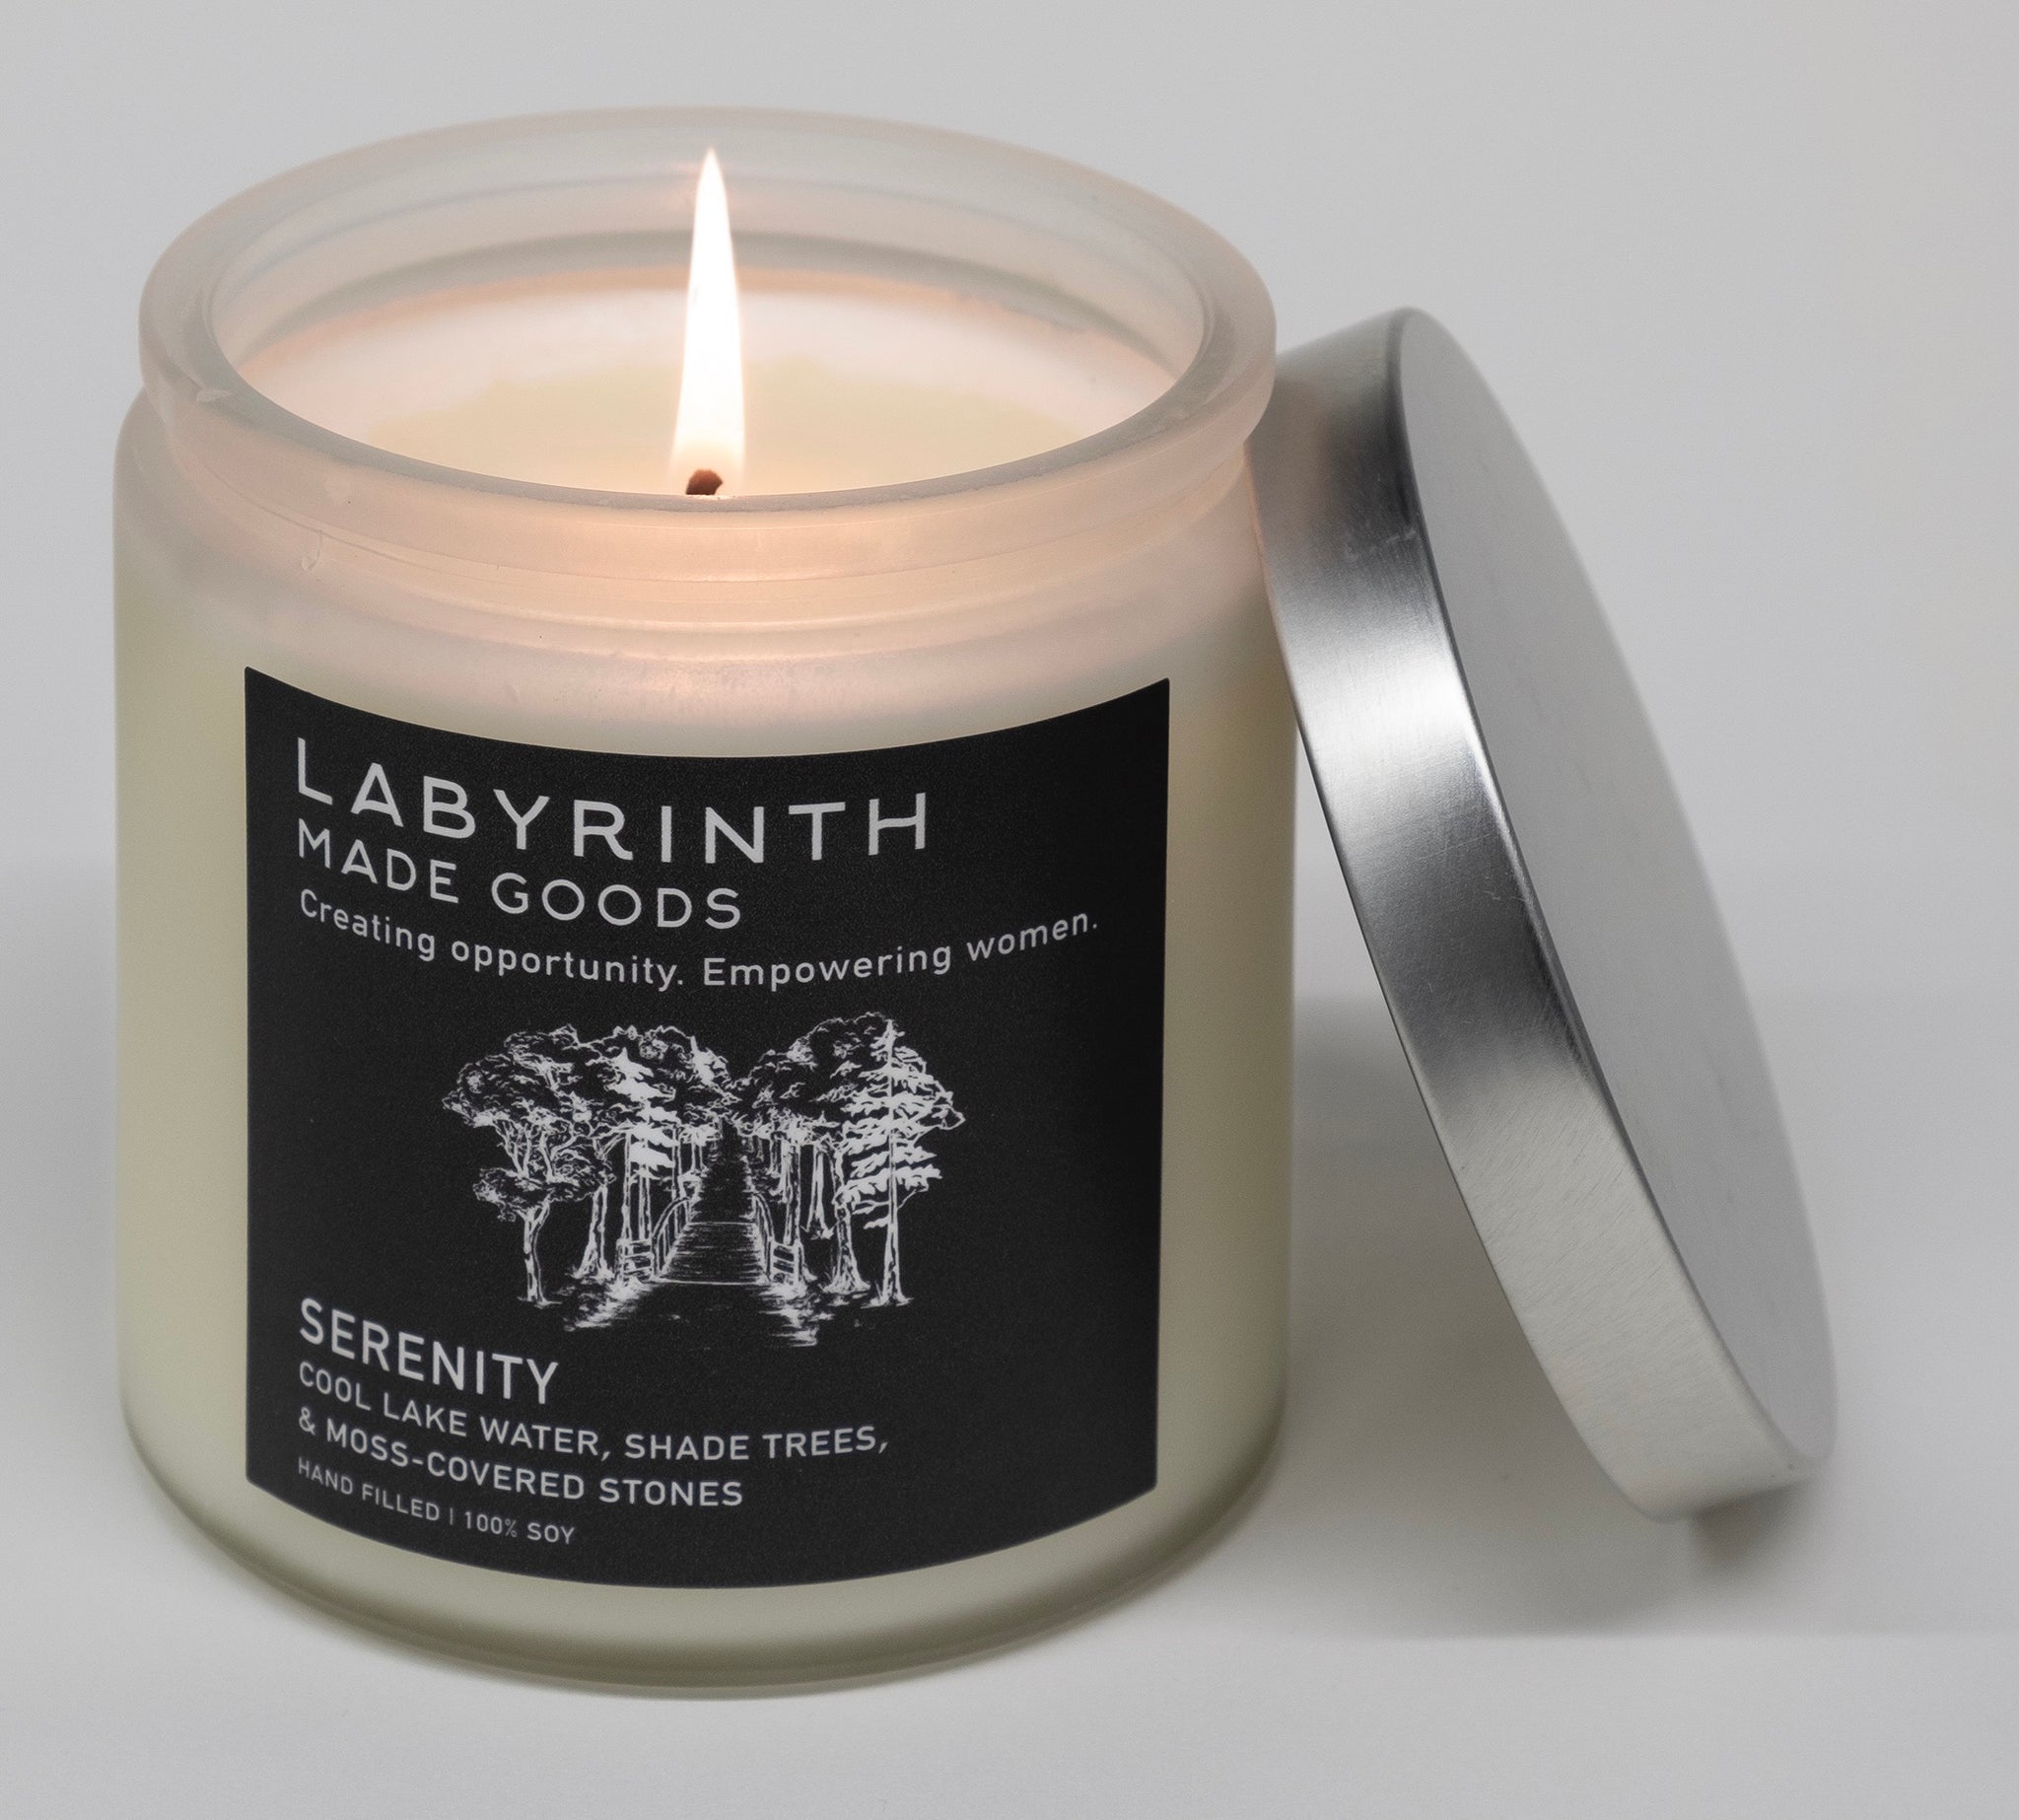 Serenity Candle - Labyrinth Made Goods – The Garlic Press, Inc.